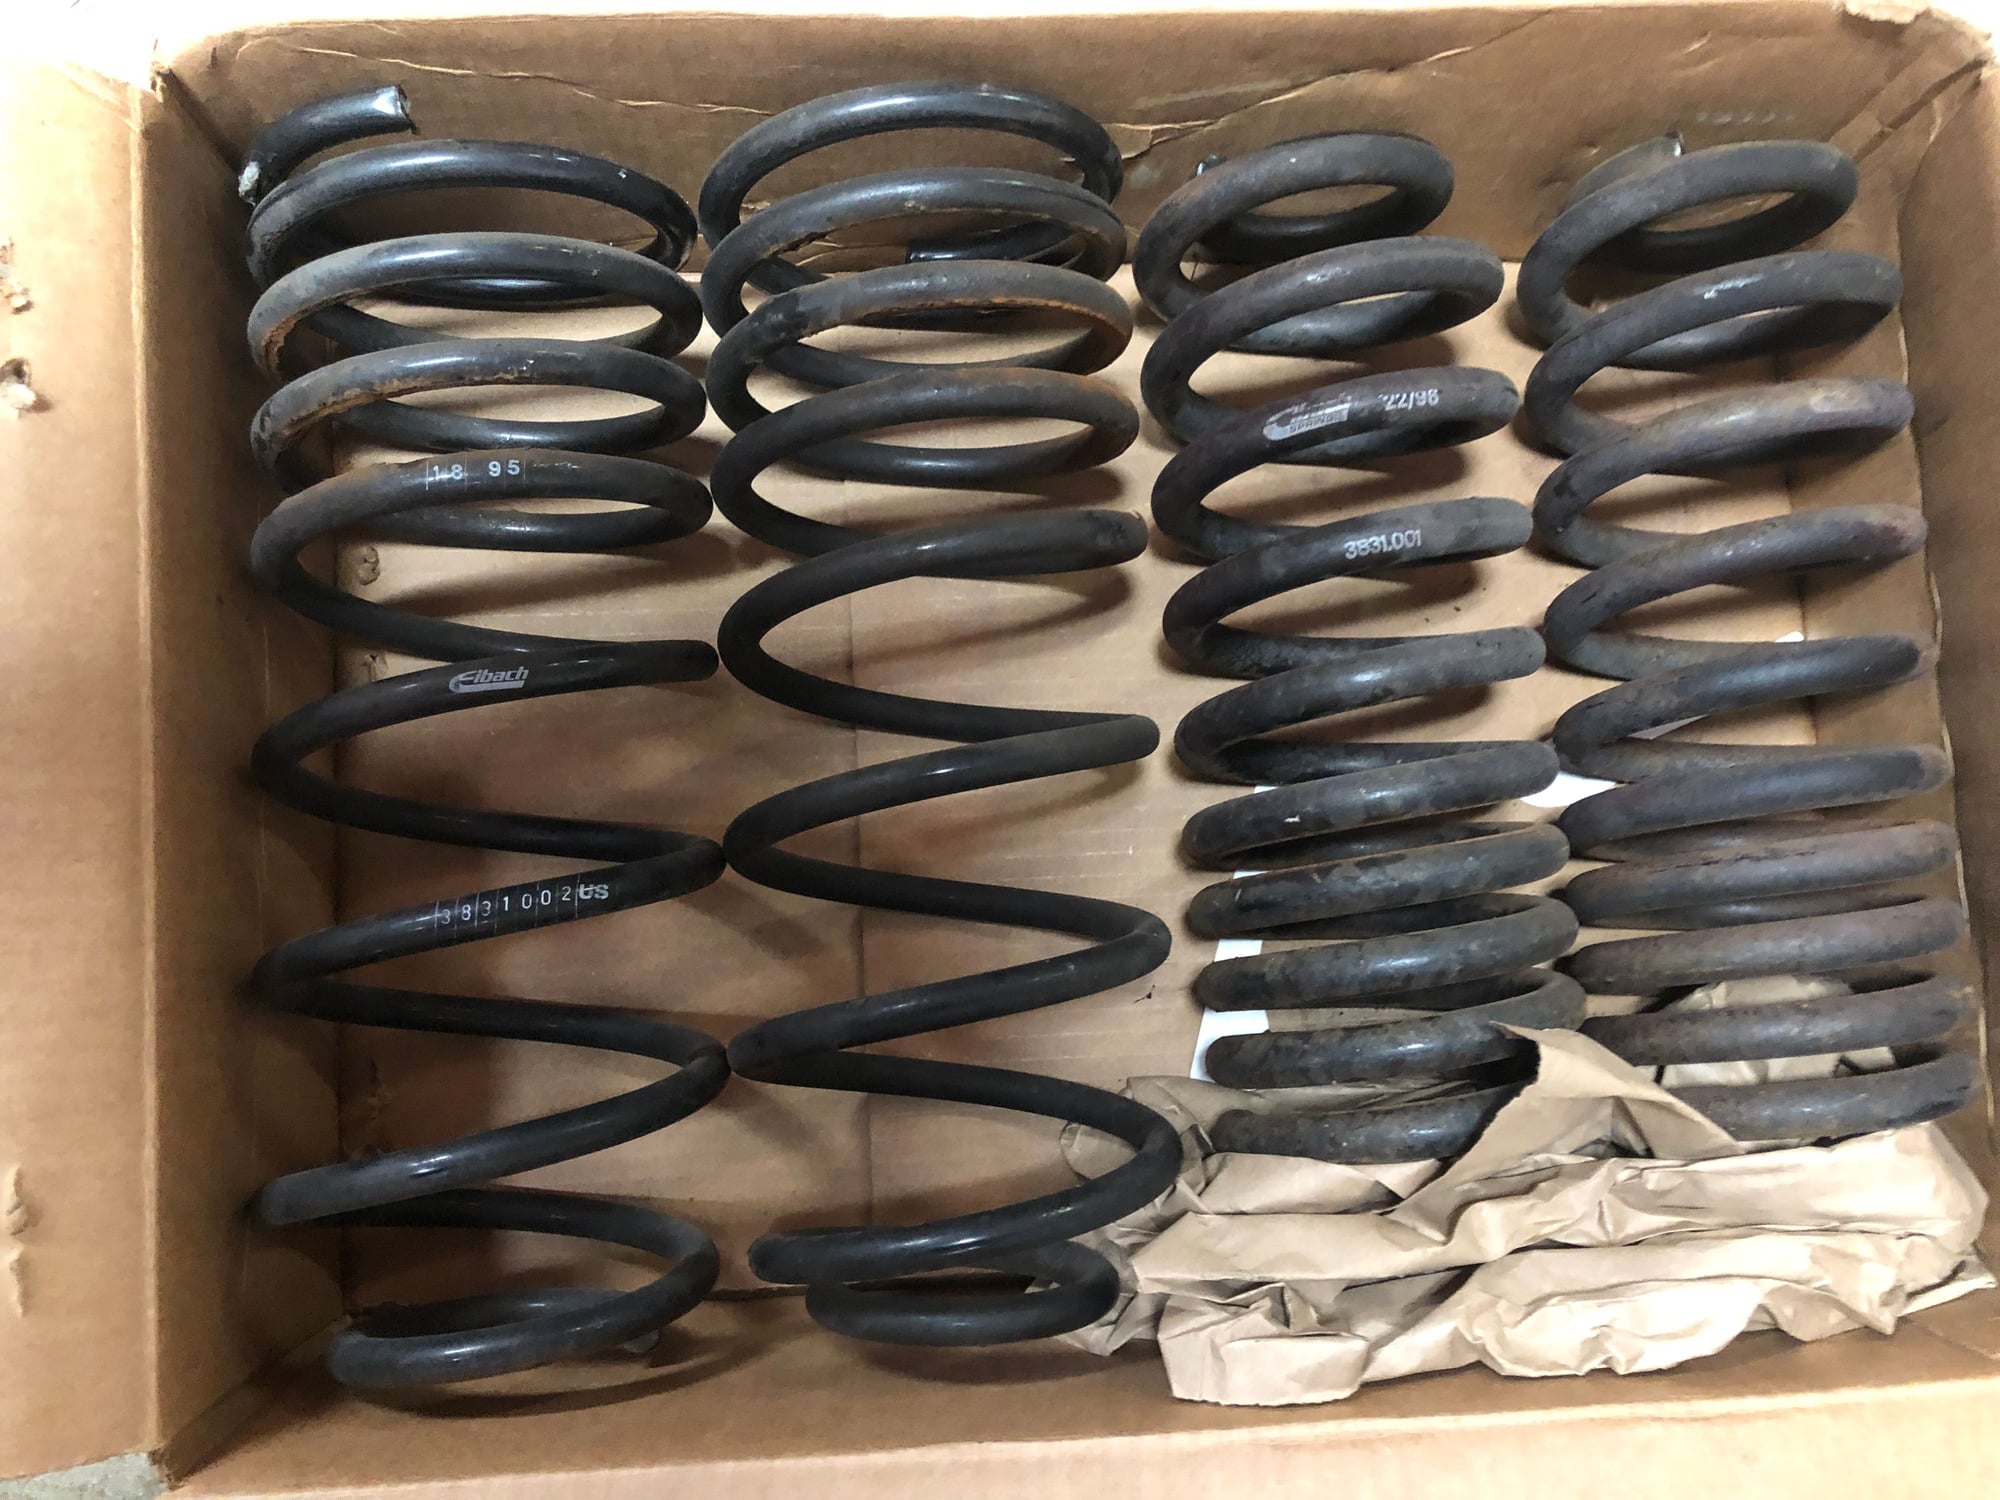  - 1993-2002 QA1 Single Adj Shocks Front and Rear with eibach springs - Long Hill, NJ 07946, United States